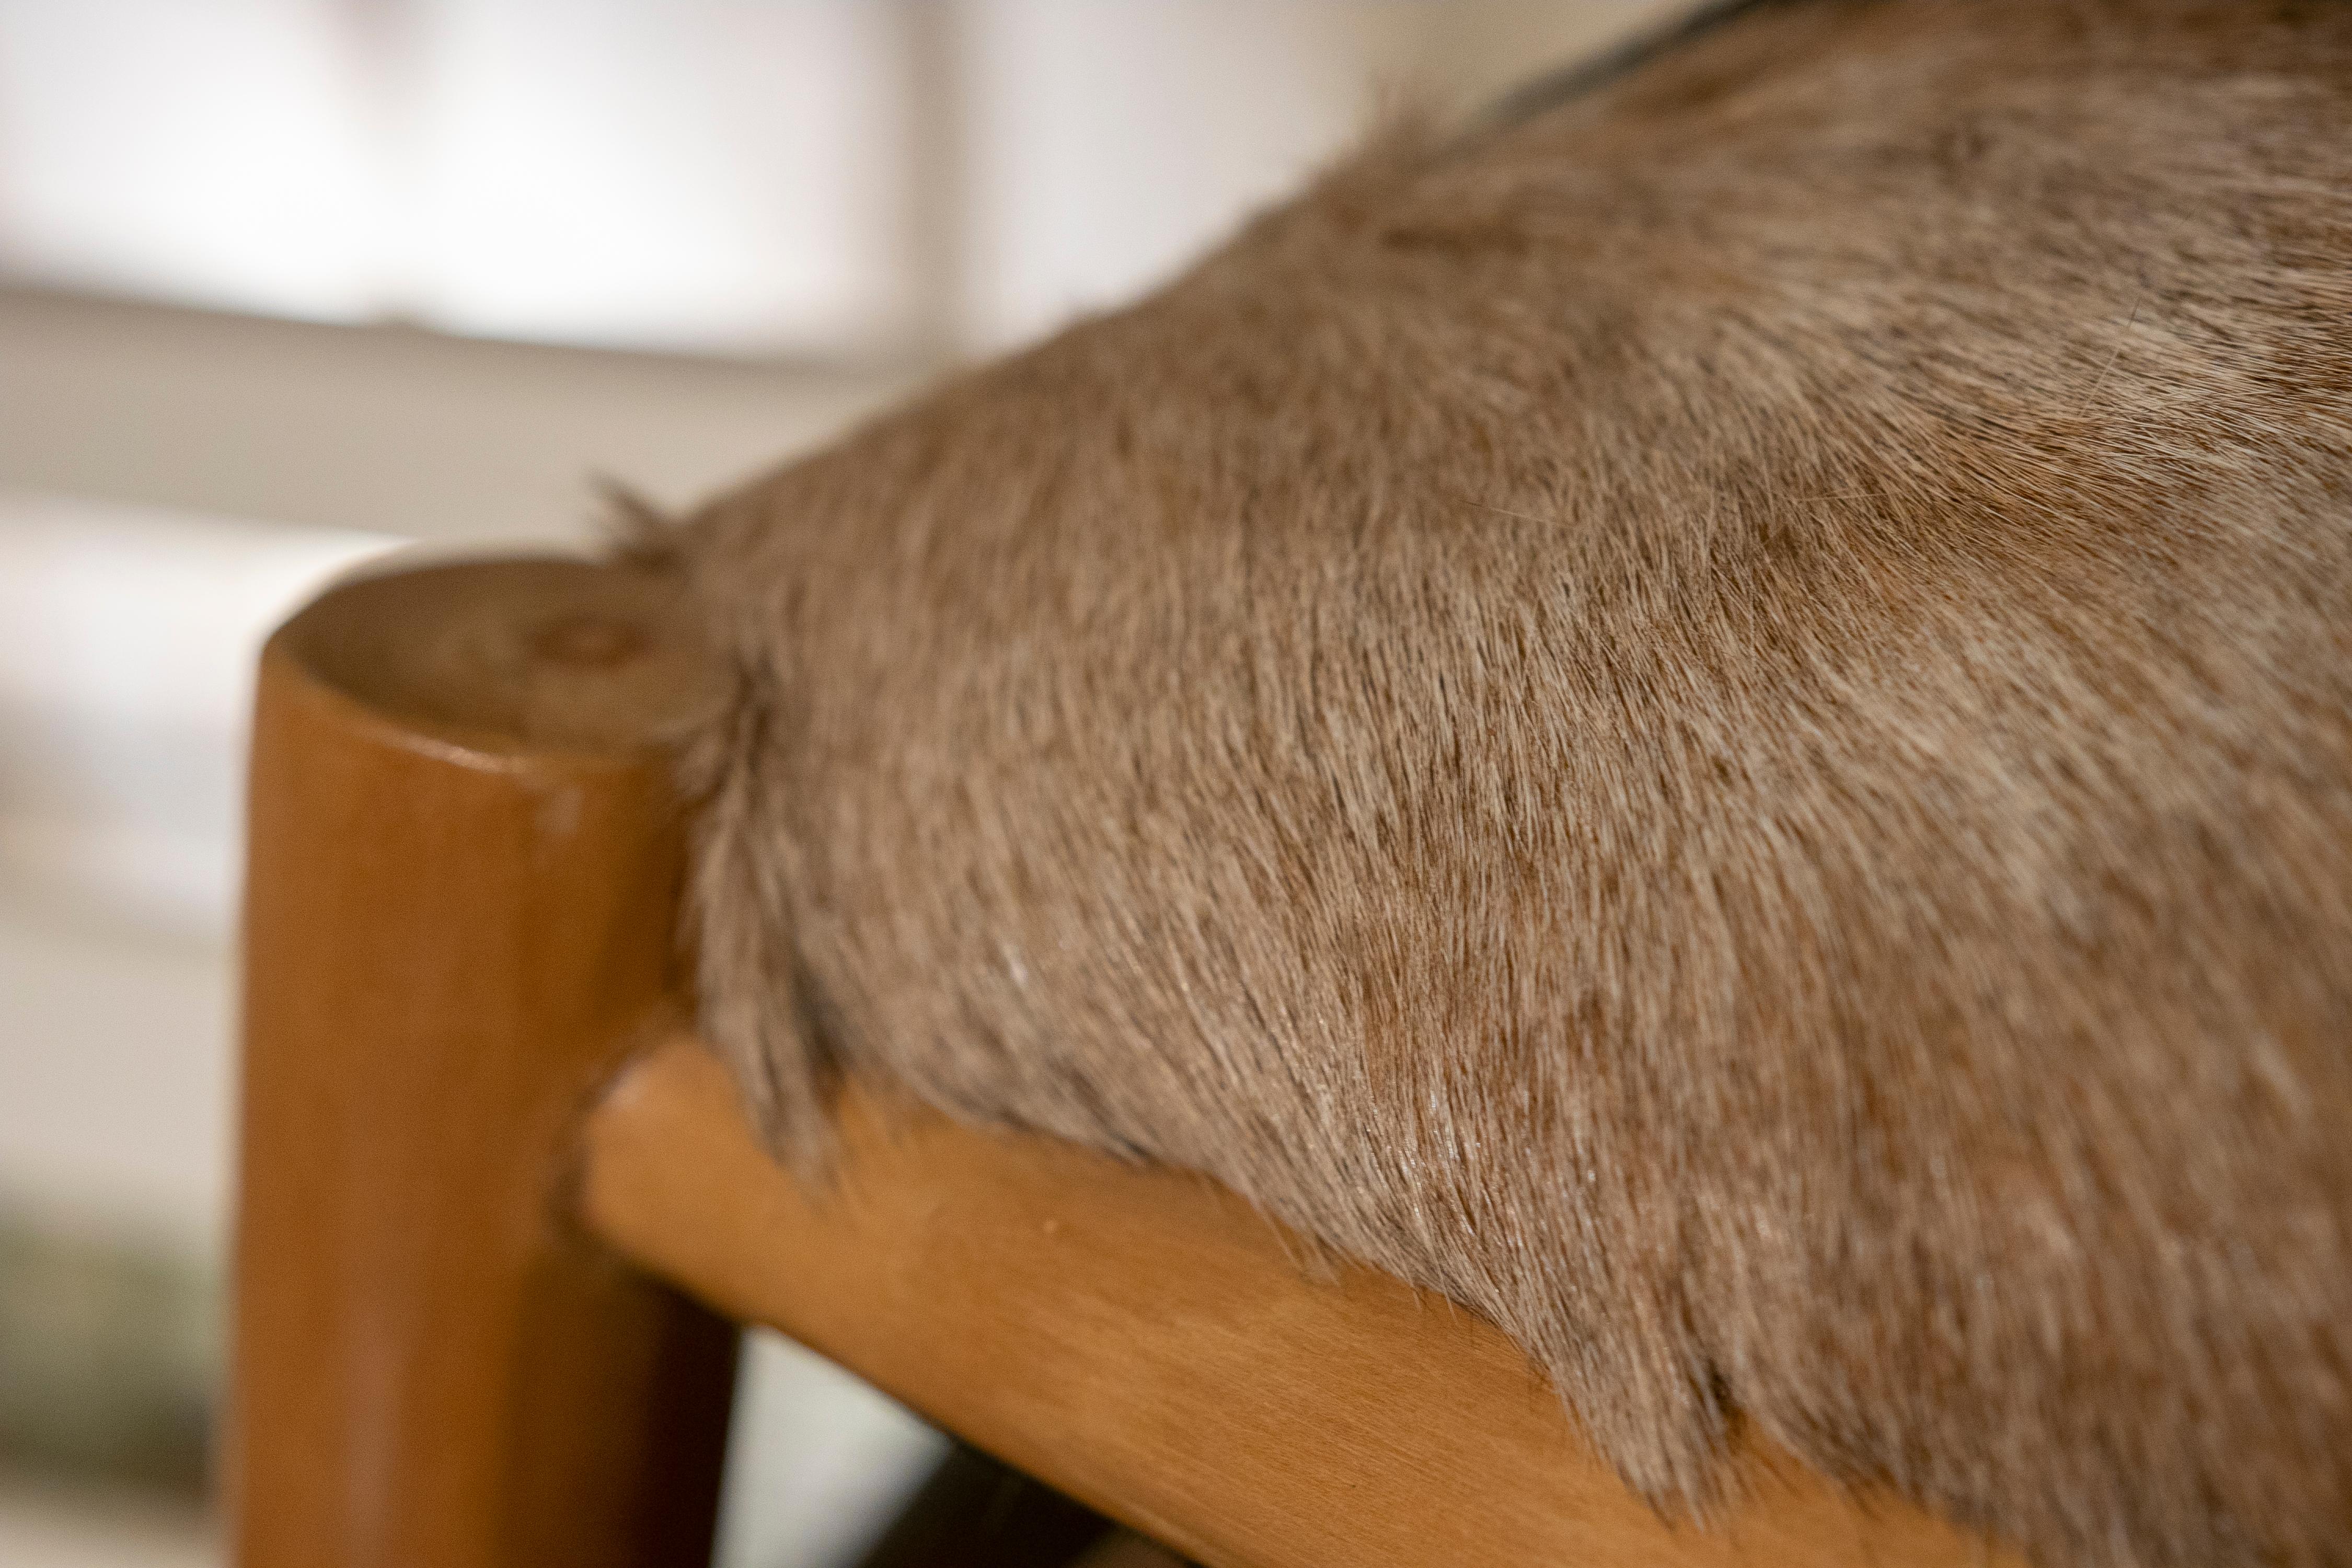 Animal Skin German Wooden Stool with a Fallow Deer Leather Seat